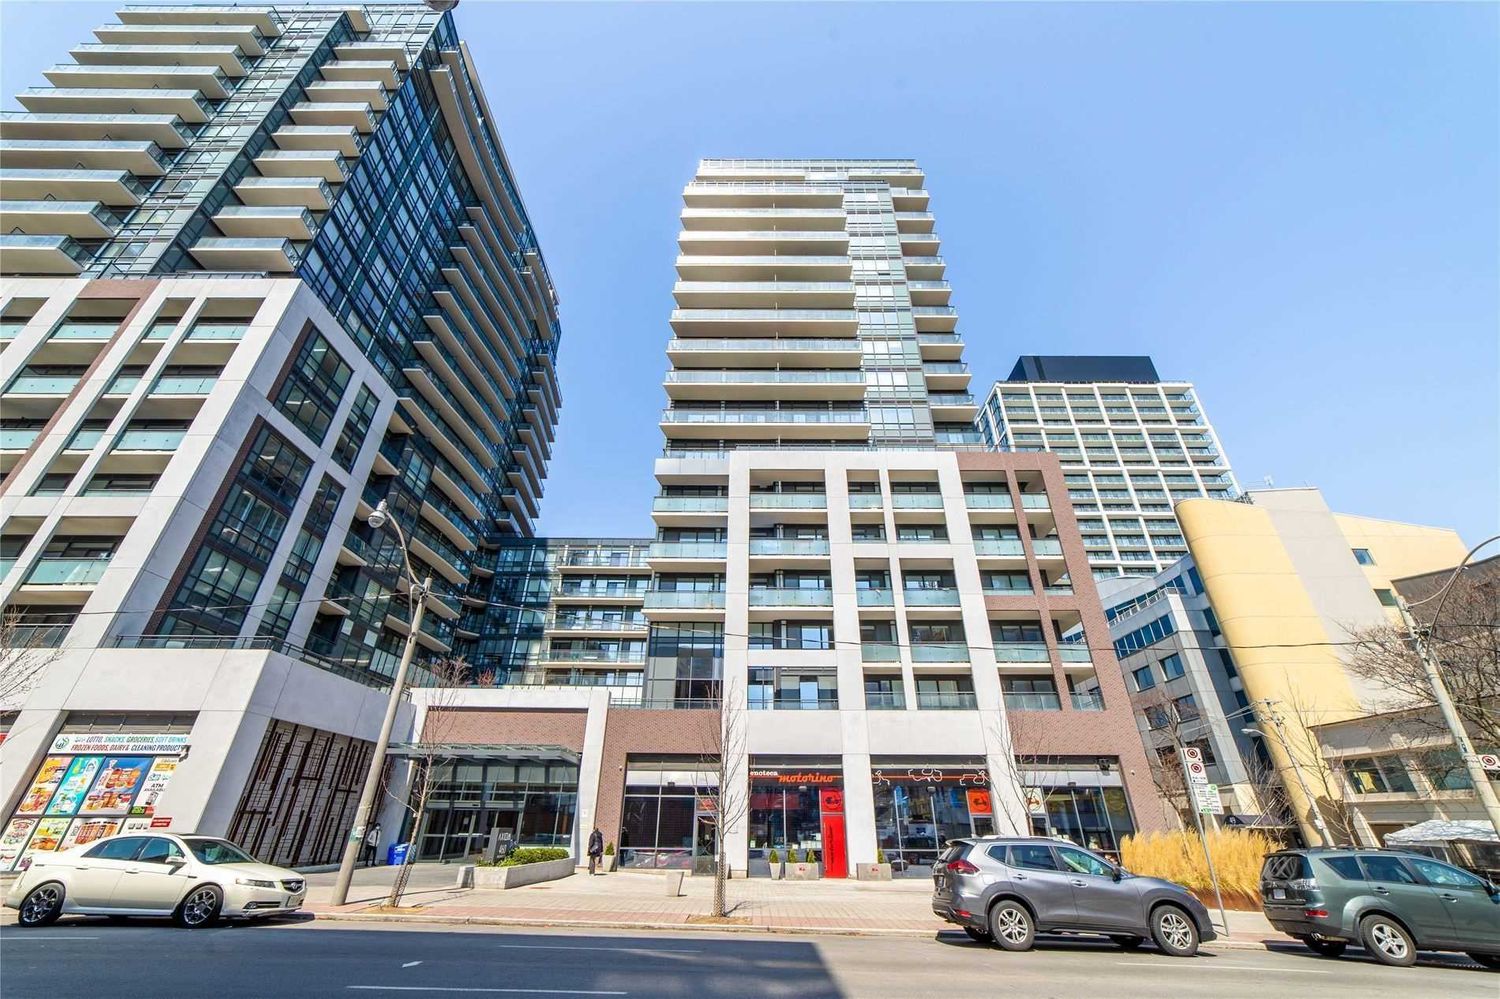 460 Adelaide Street E. Axiom Condos is located in  Downtown, Toronto